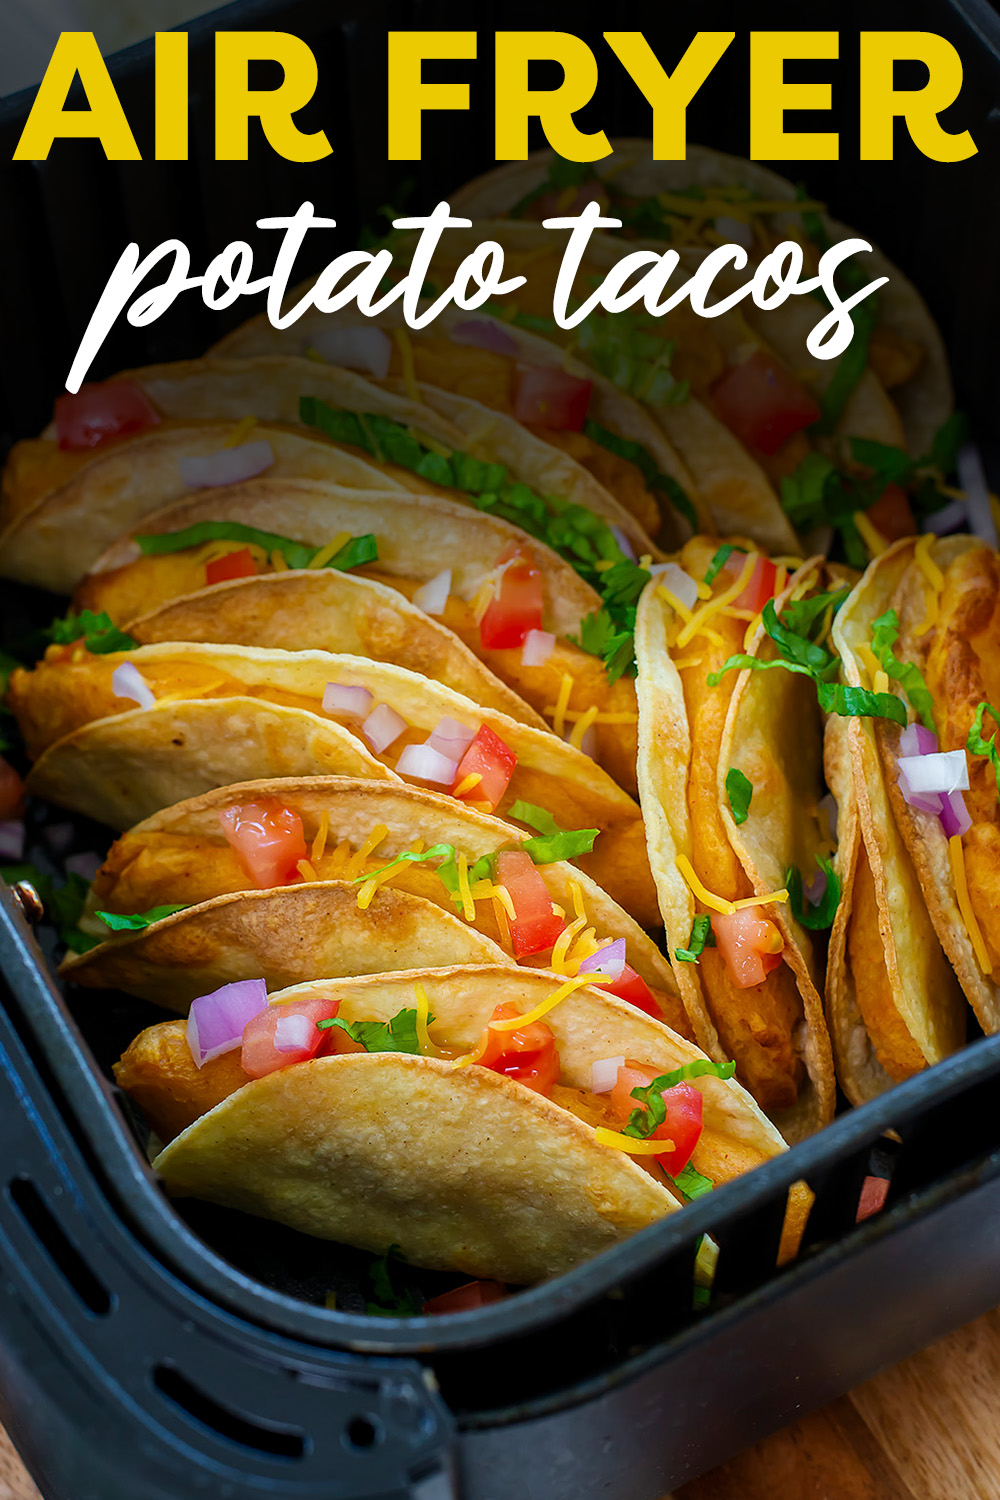 These fried potato tacos are cooked to a fantastic crisp finish in your air fryer.  This is a great vegetarian taco!